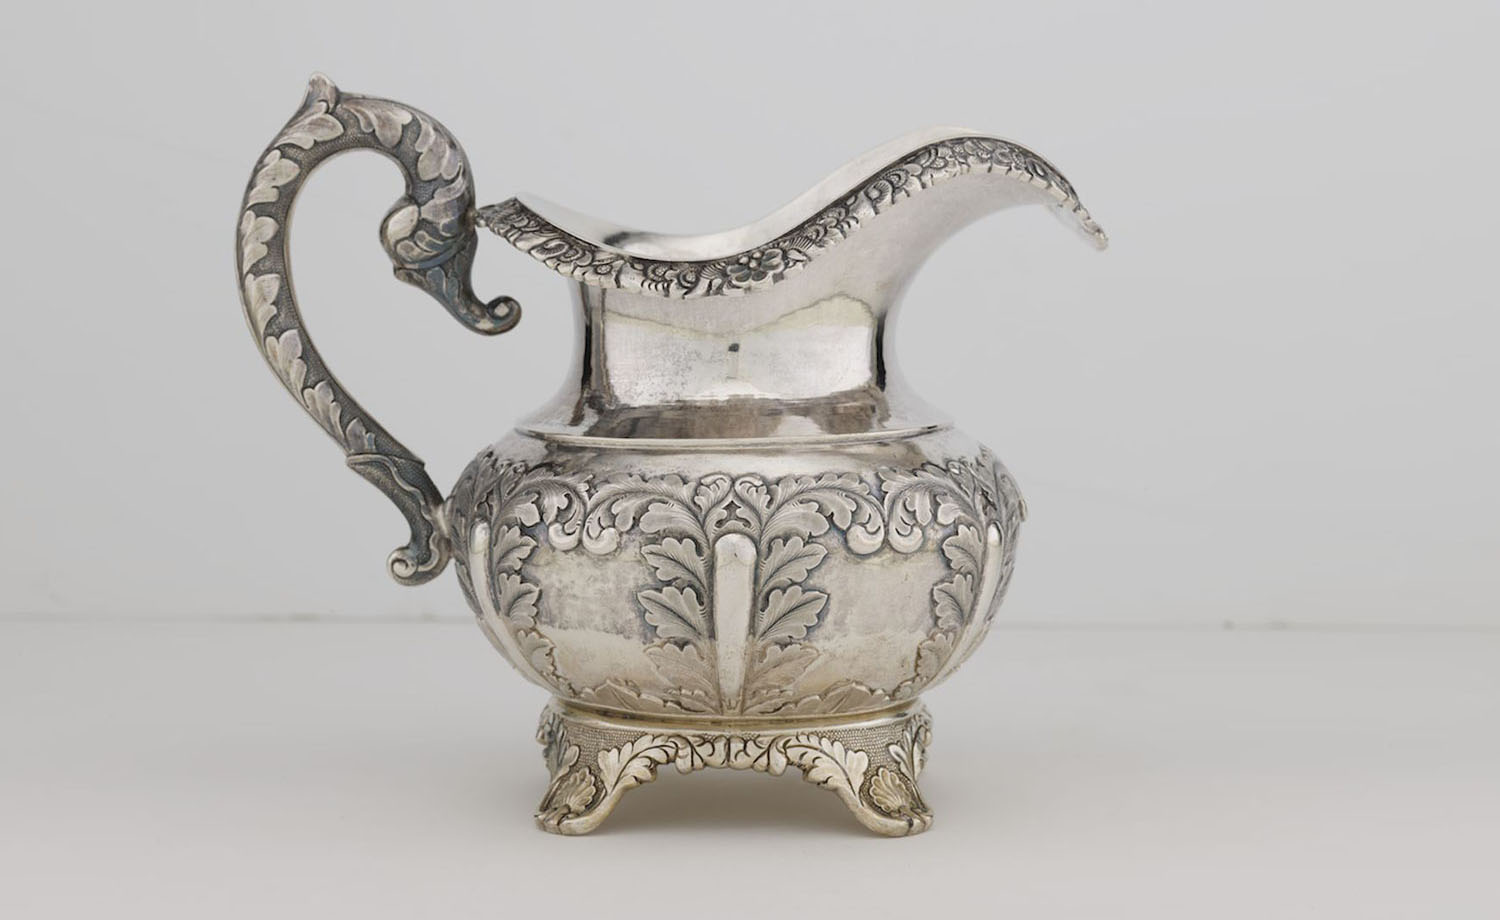 Silver cream jug decorated with acanthus leaf pattern Cutshing, Canton Mark of "CUT" and pseudo hallmarks